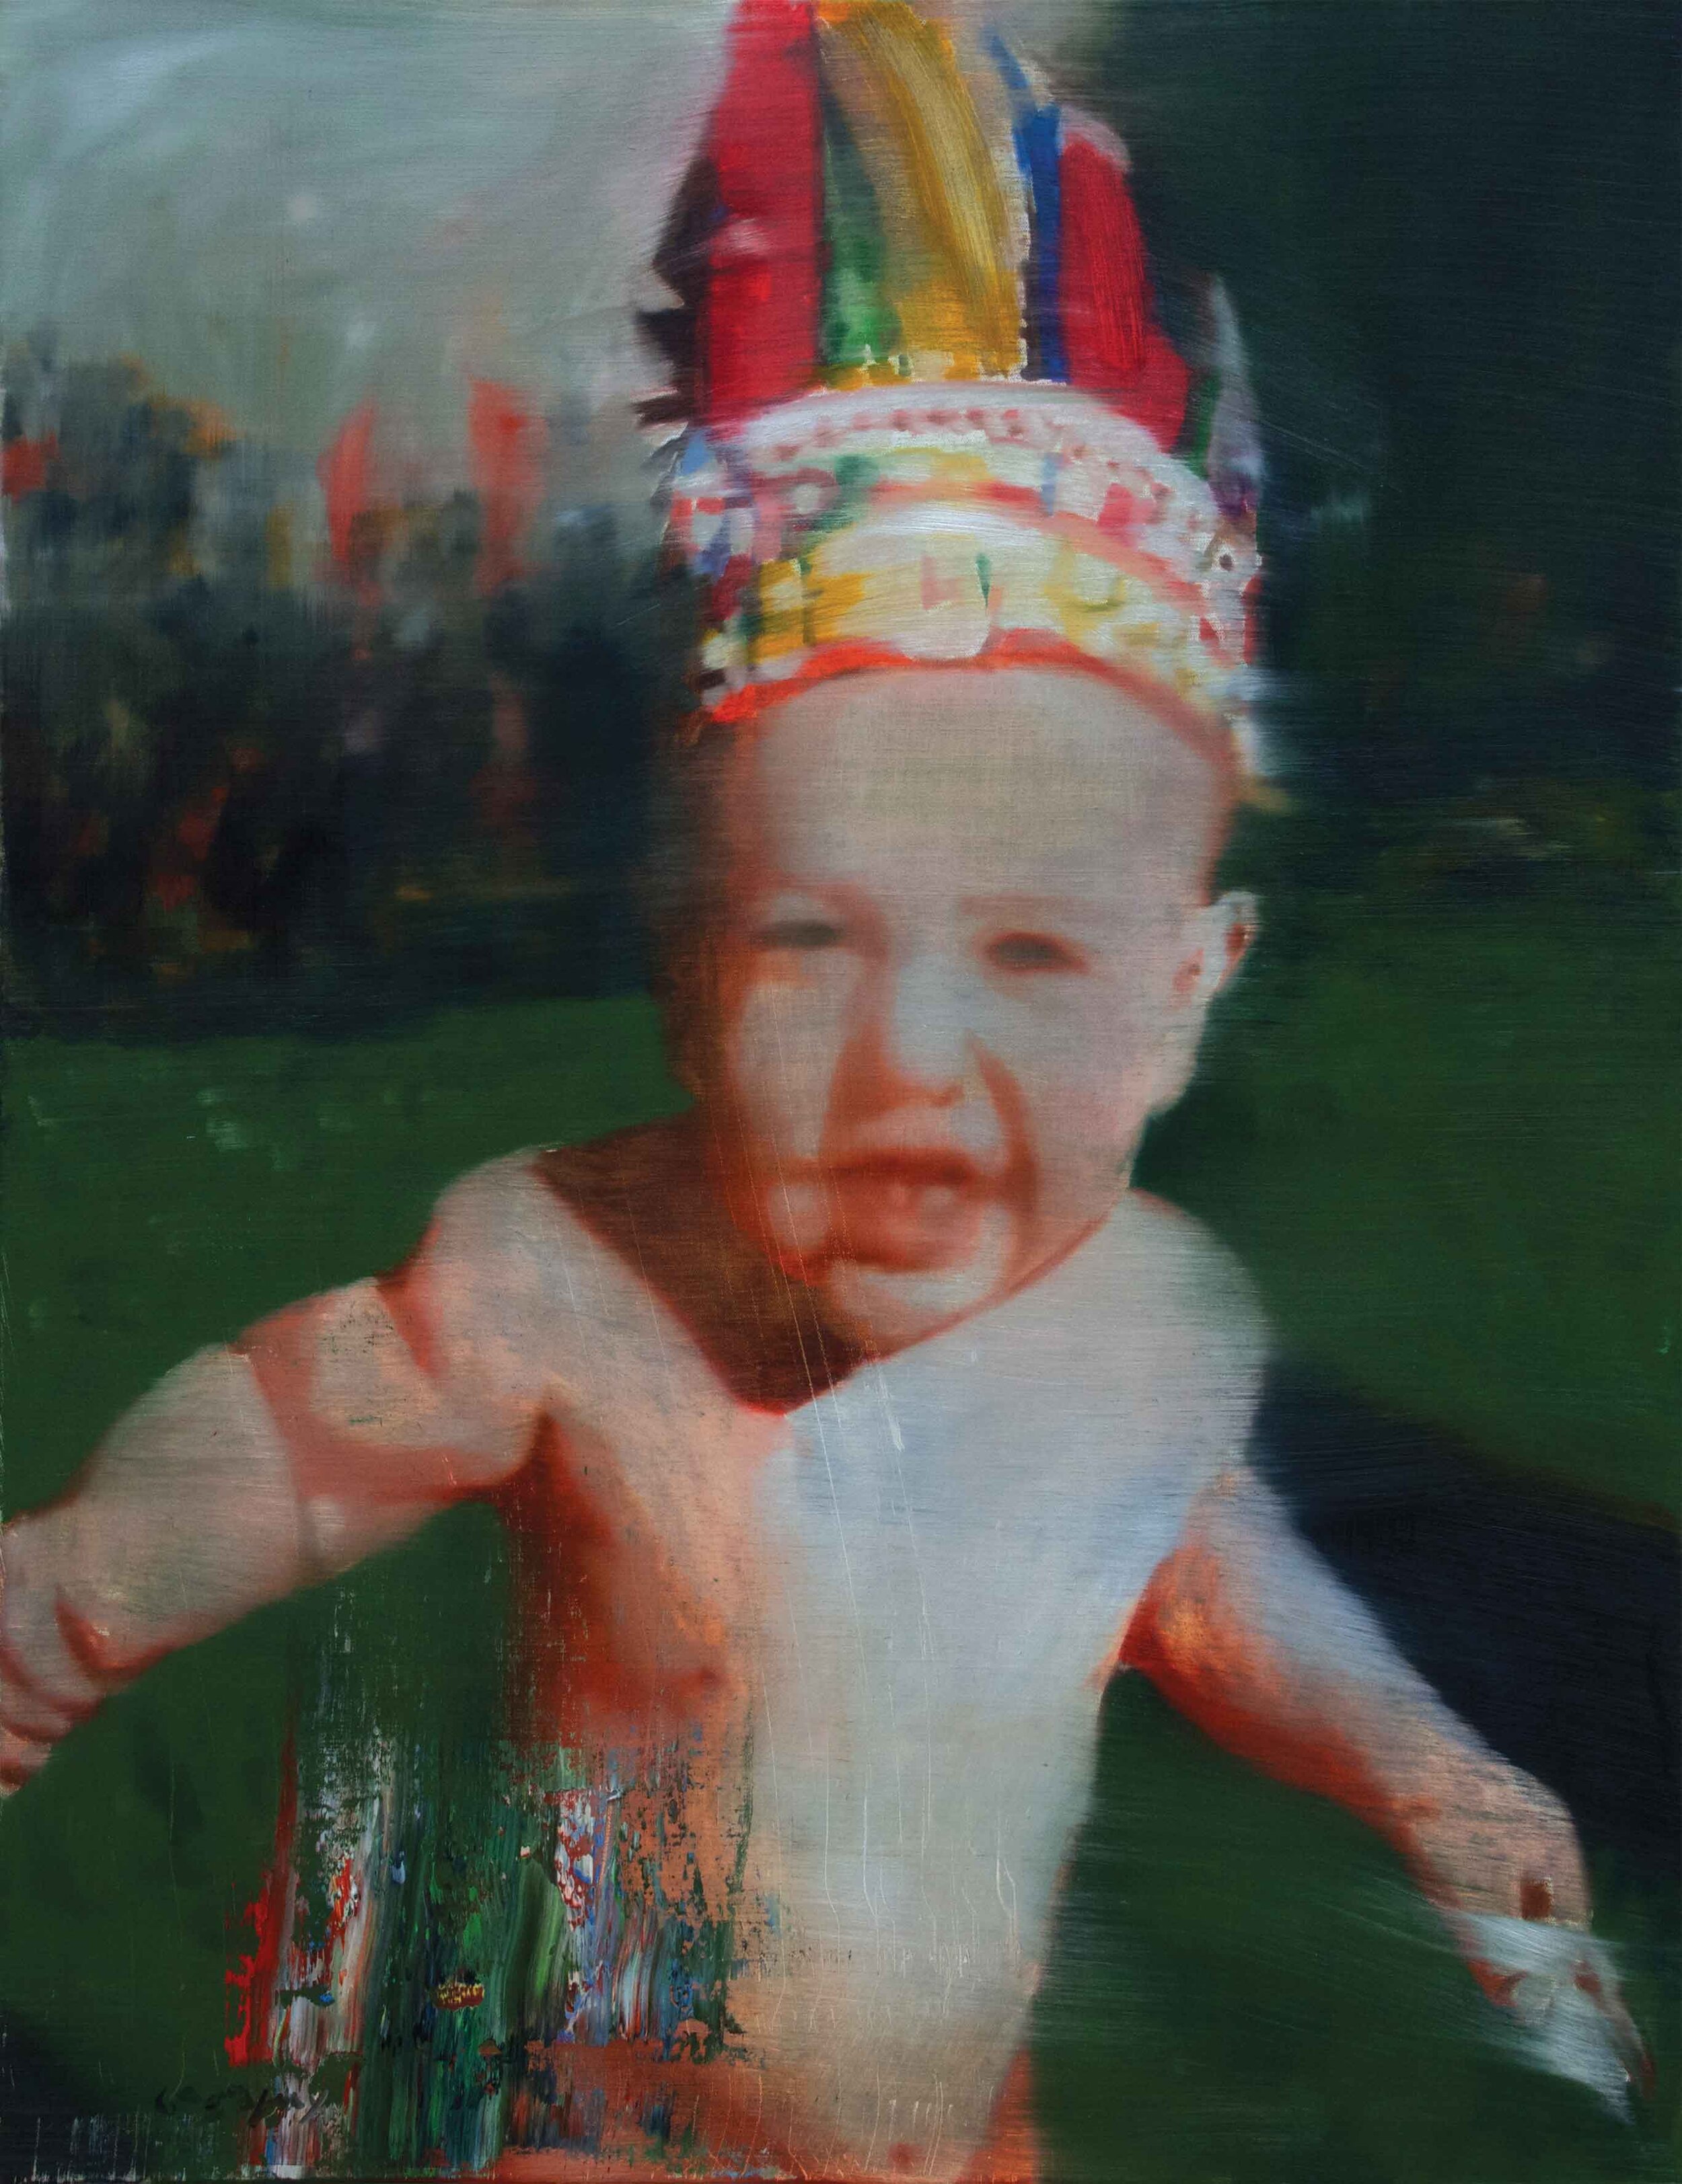 Wild Child, 2014. Oil on linen, 36x40 in. SOLD, private collection (Copy)